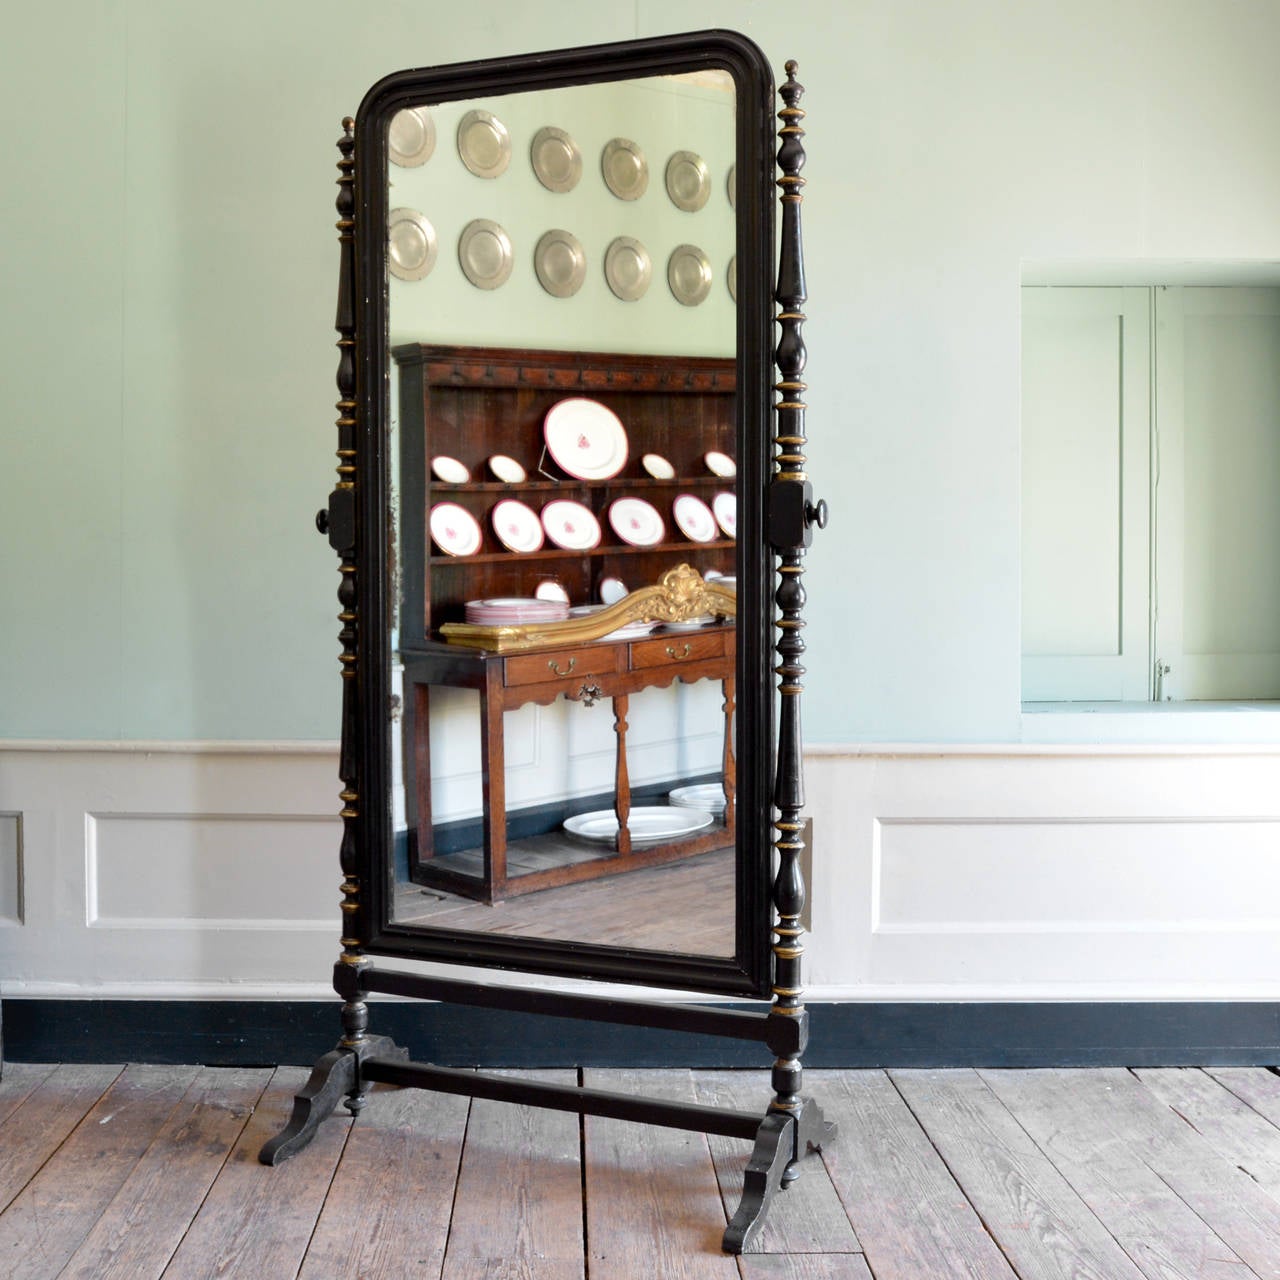 An enormous ebonised cheval mirror, parcel-gilt with original plate glass, mid-Victorian.

Available to view at Brunswick House.

Dimensions:
Height 223 cm
Width 103 cm
Depth 65.5 cm